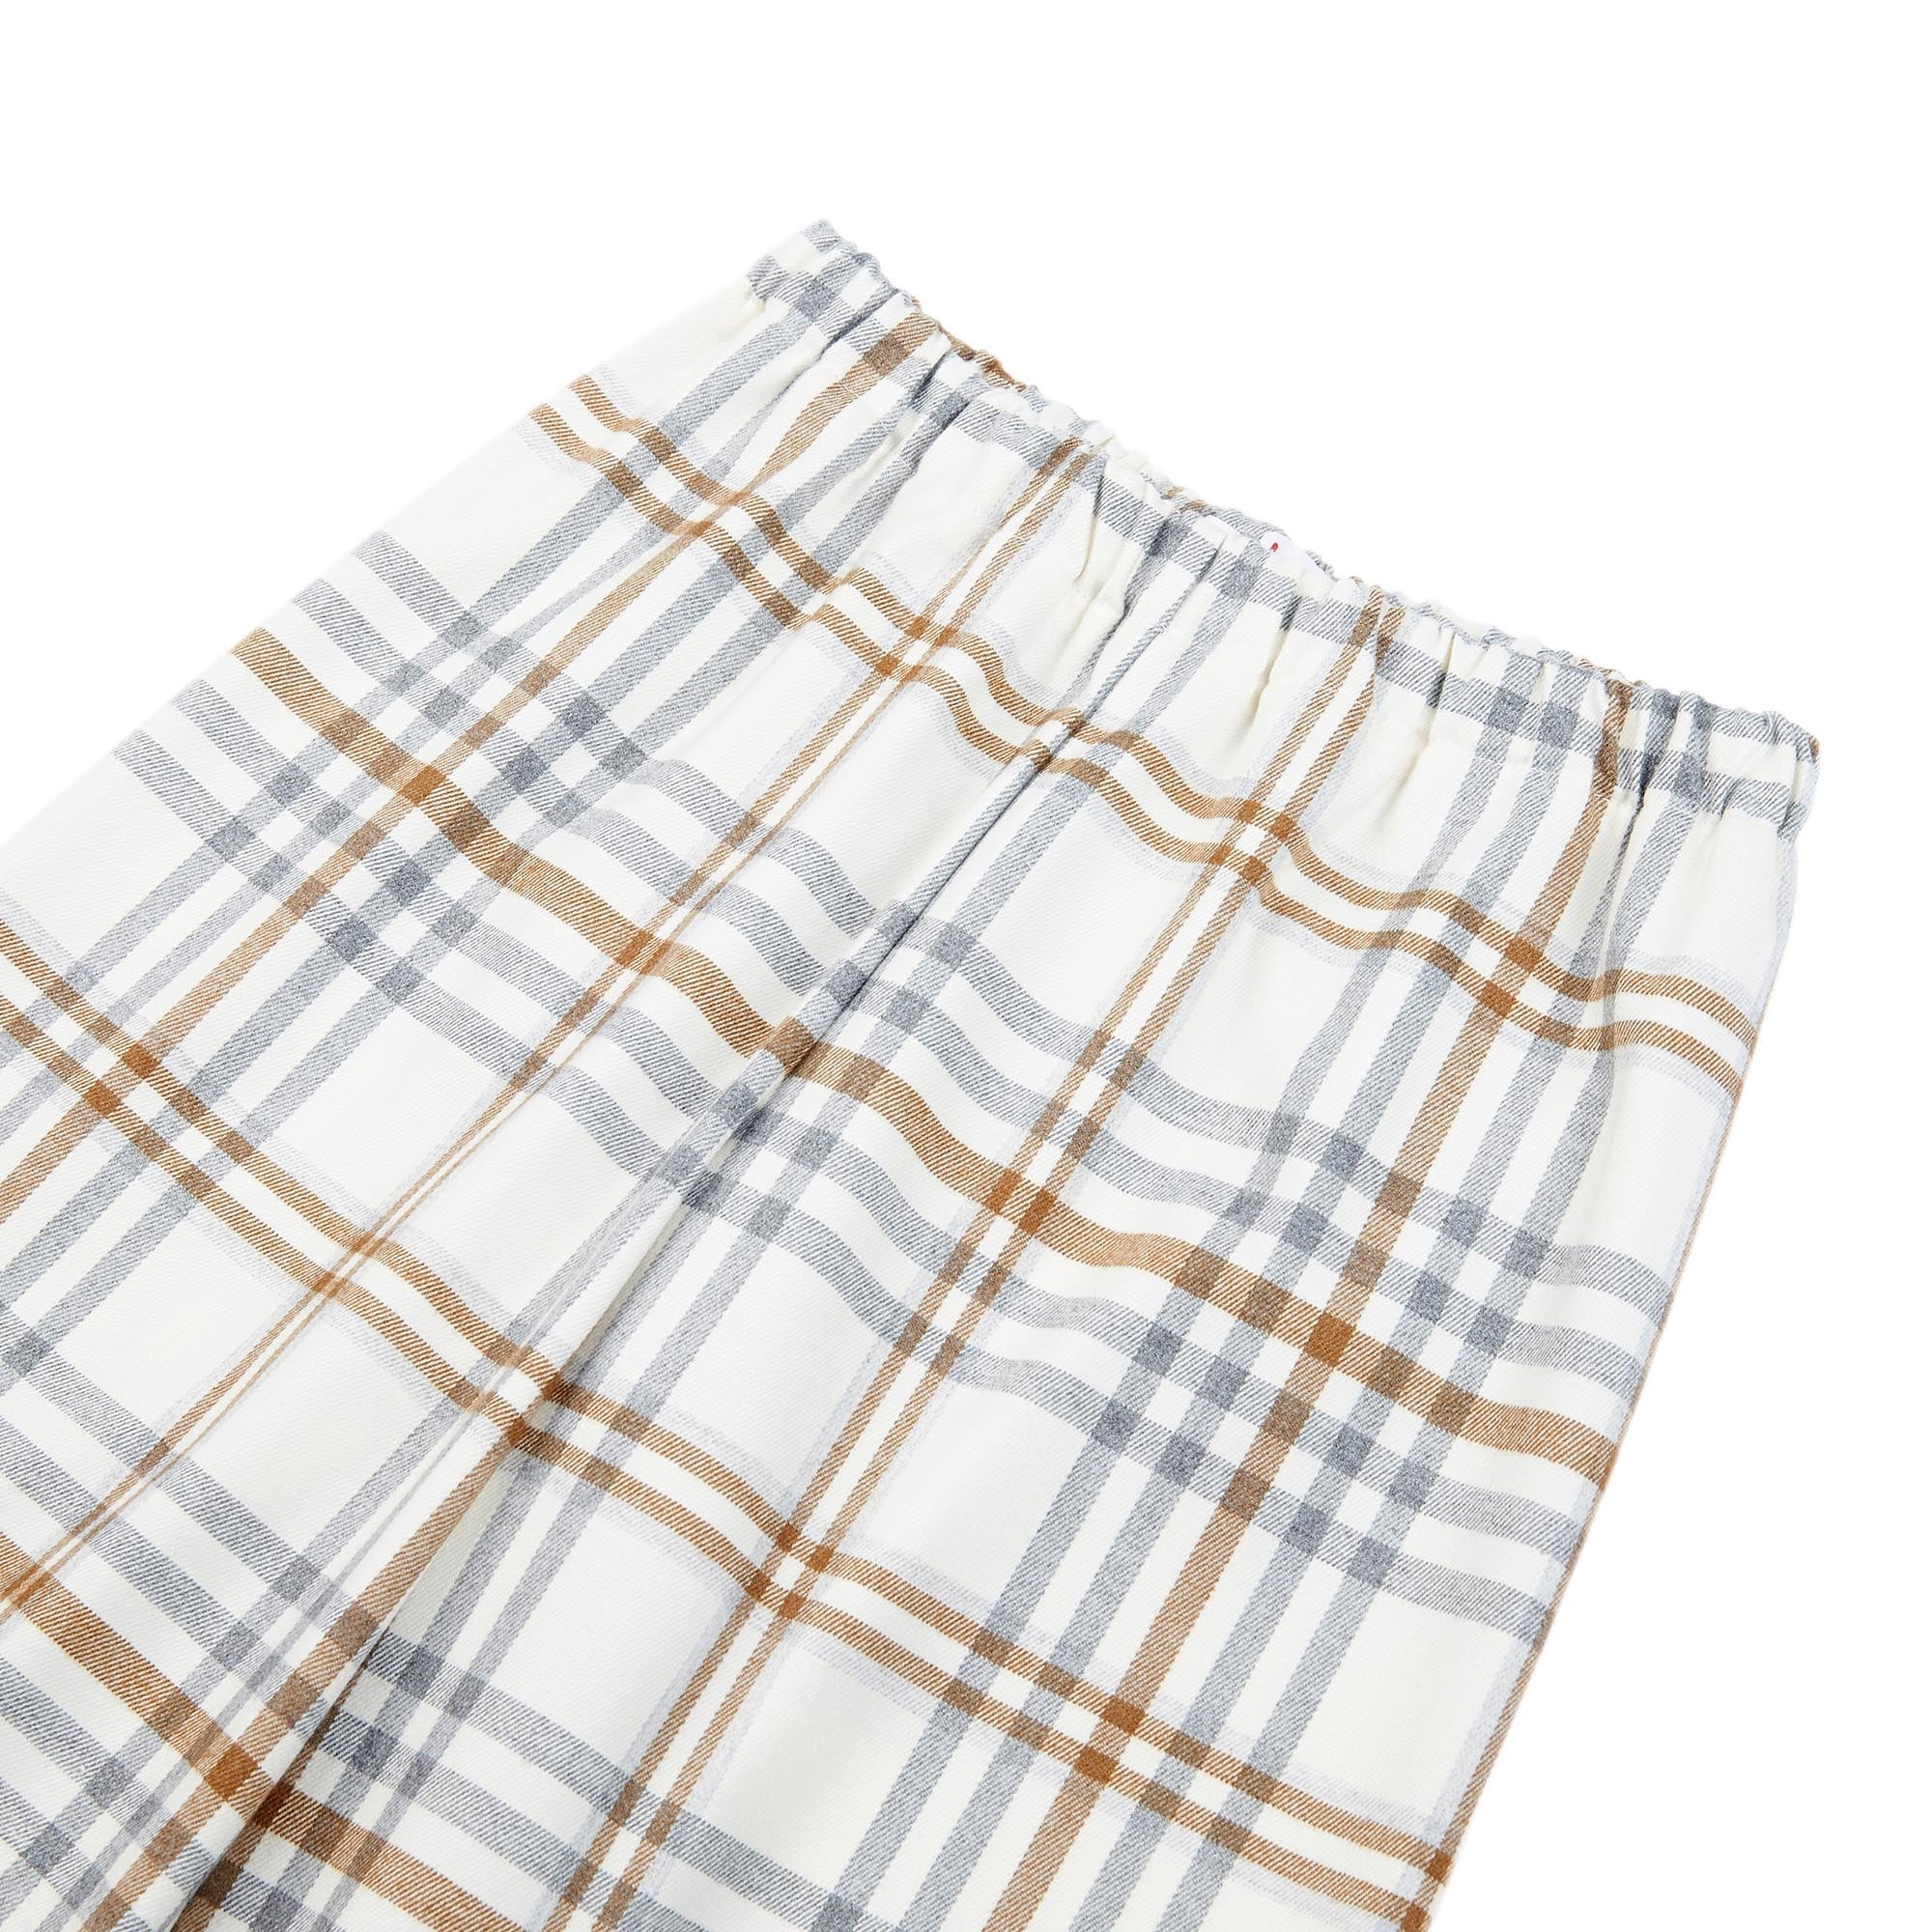 Girls Beige Check Trousers